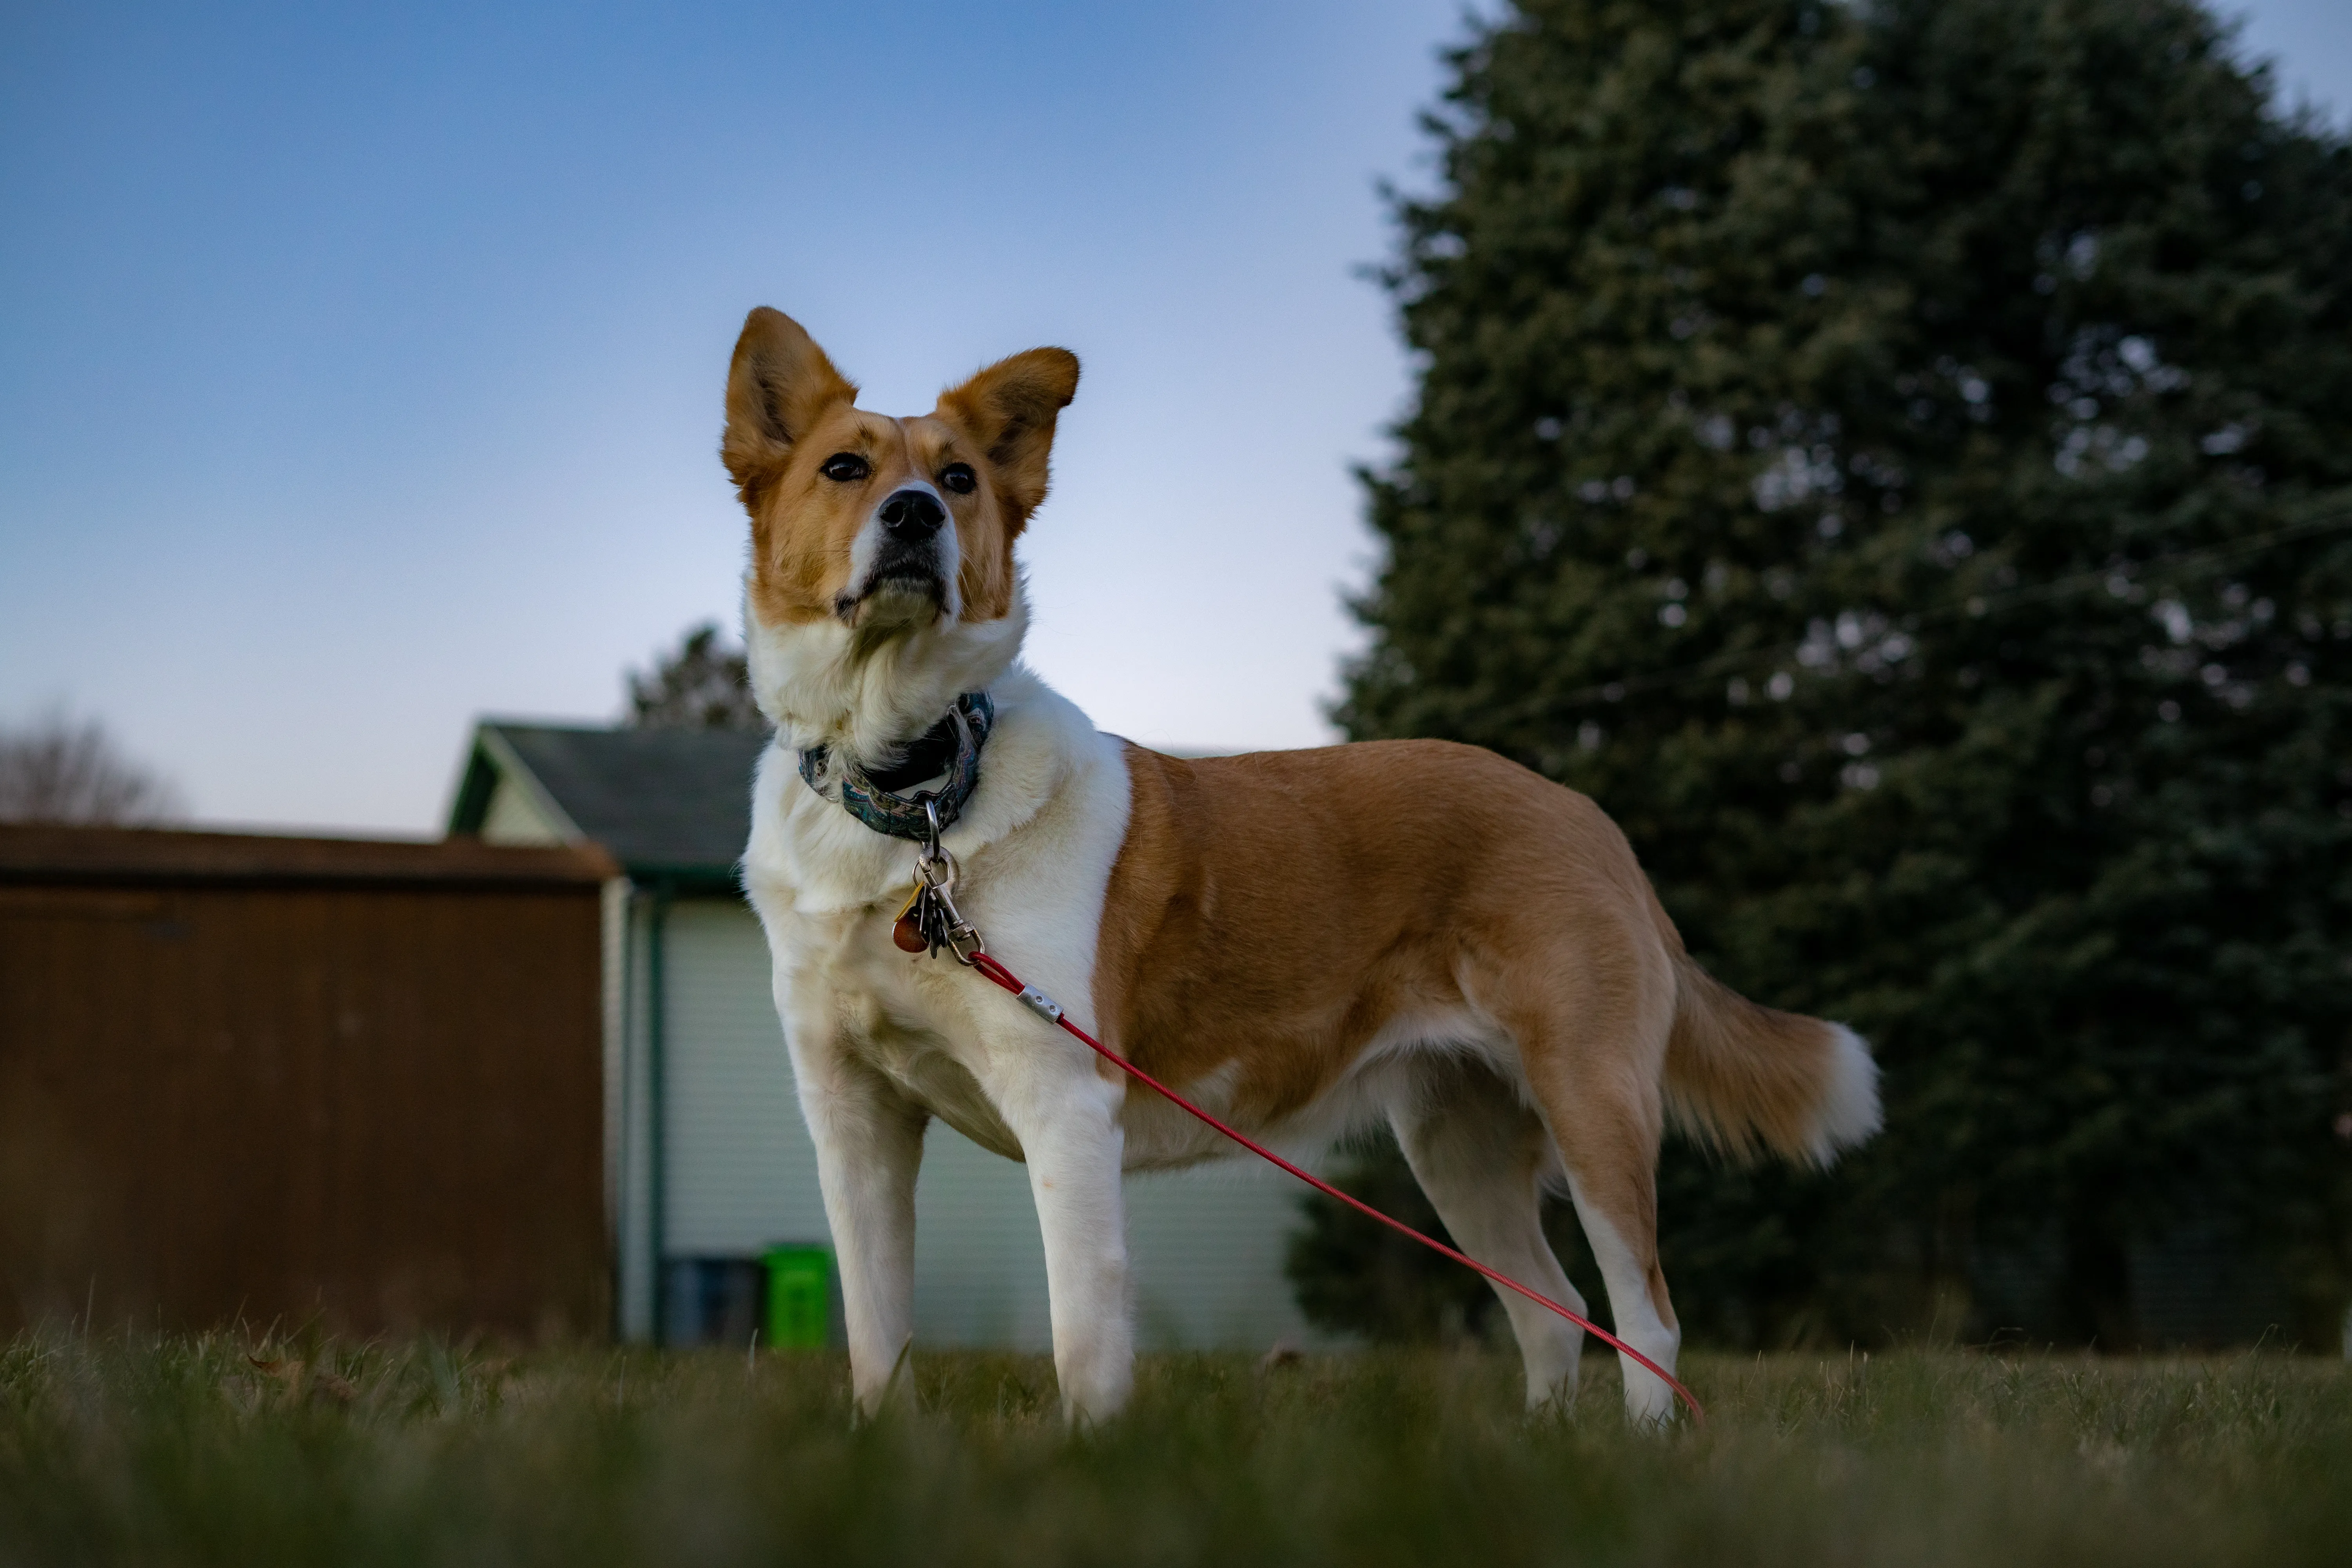 Ellie standing with her side to the camera in a majestic pose with a dark setting sun sky behind her with a shed to the left and large trees to the right.